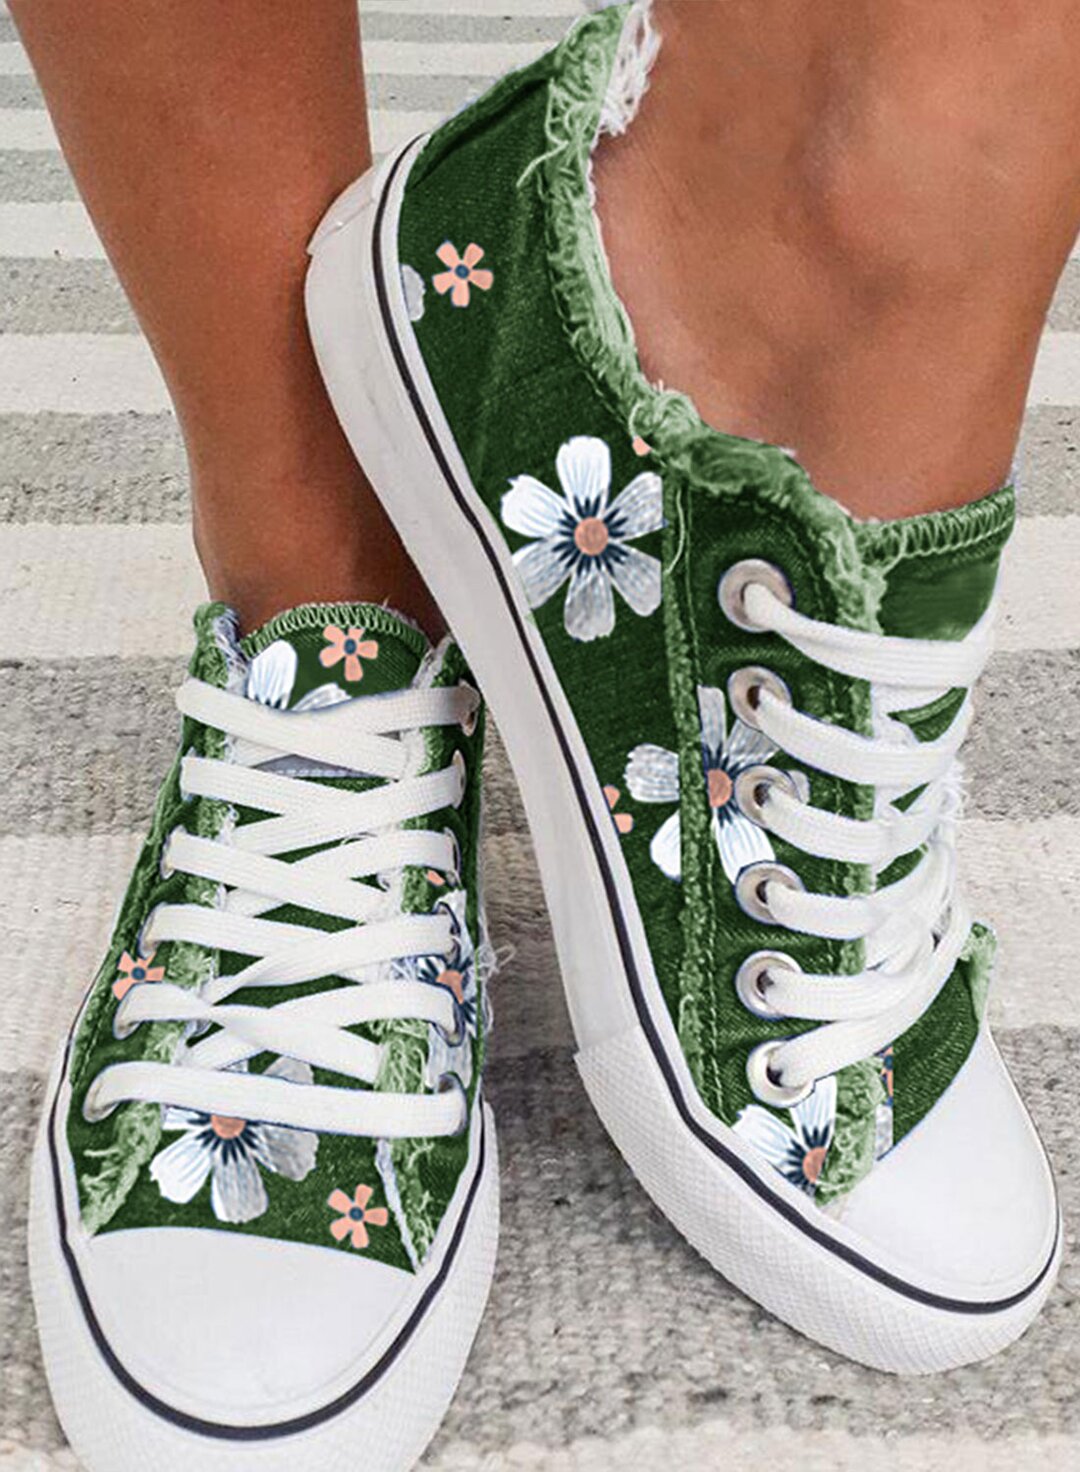 Women's Sneakers Floral Lace-up Canvas Shoes